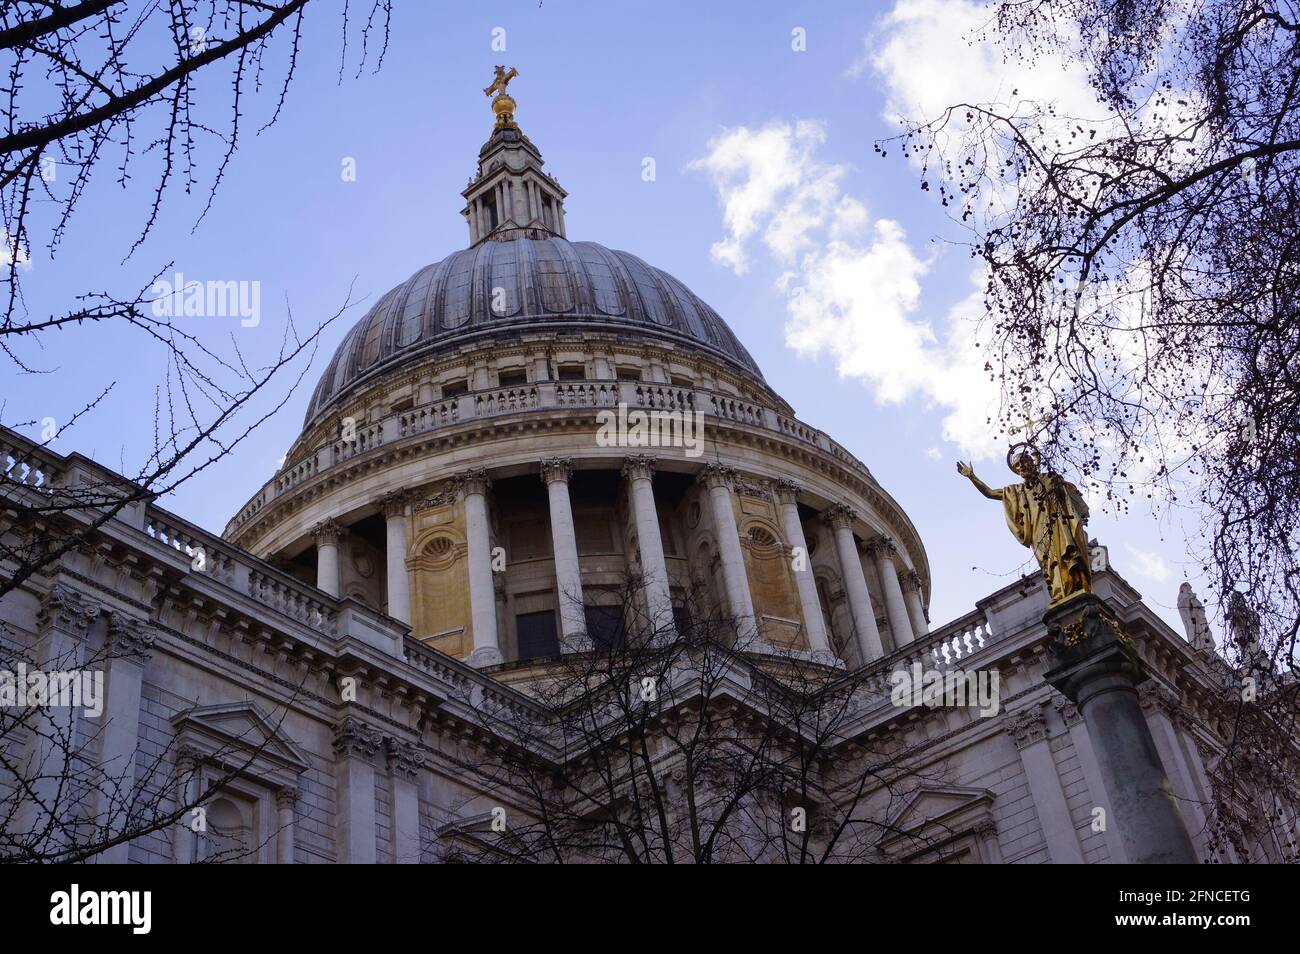 London, UK: a view from below of the dome of St. Paul's Cathedral Stock Photo